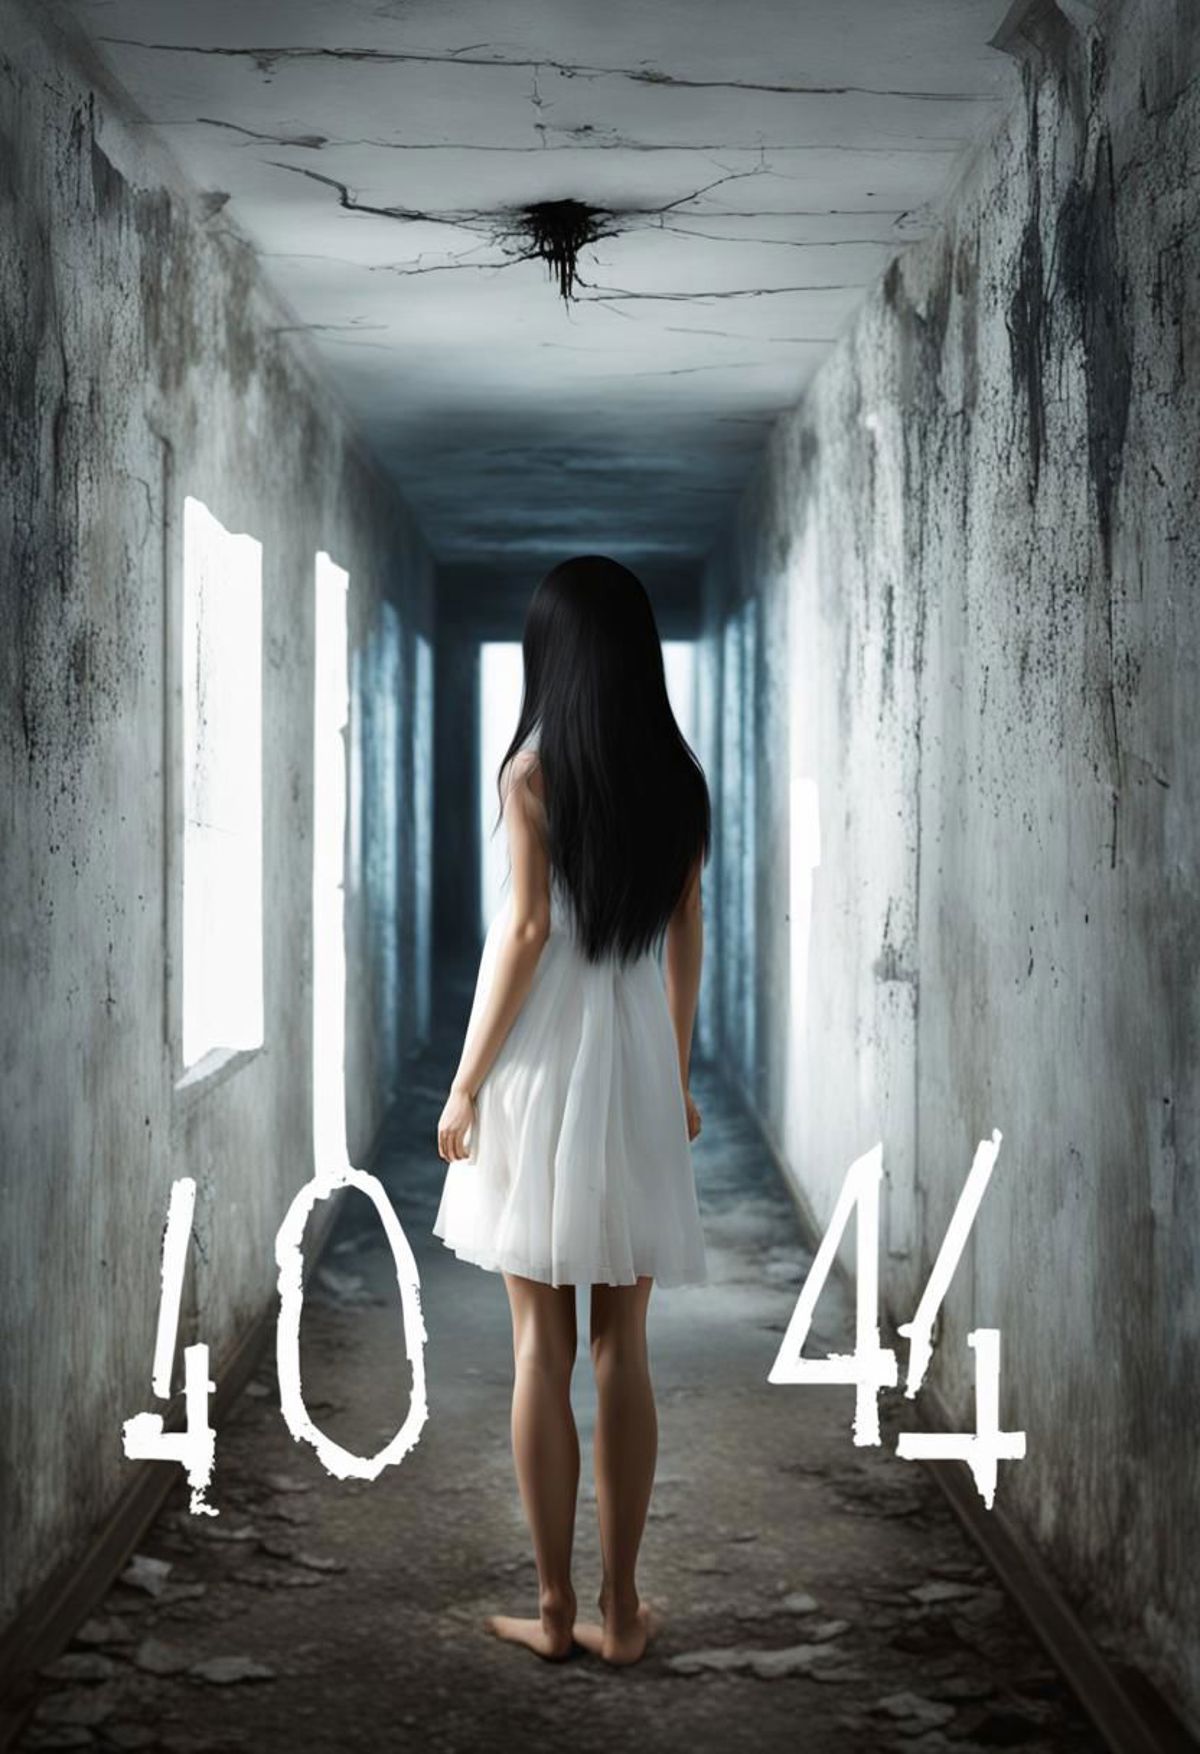 A woman standing in a dark hallway with the number 404 on the wall.